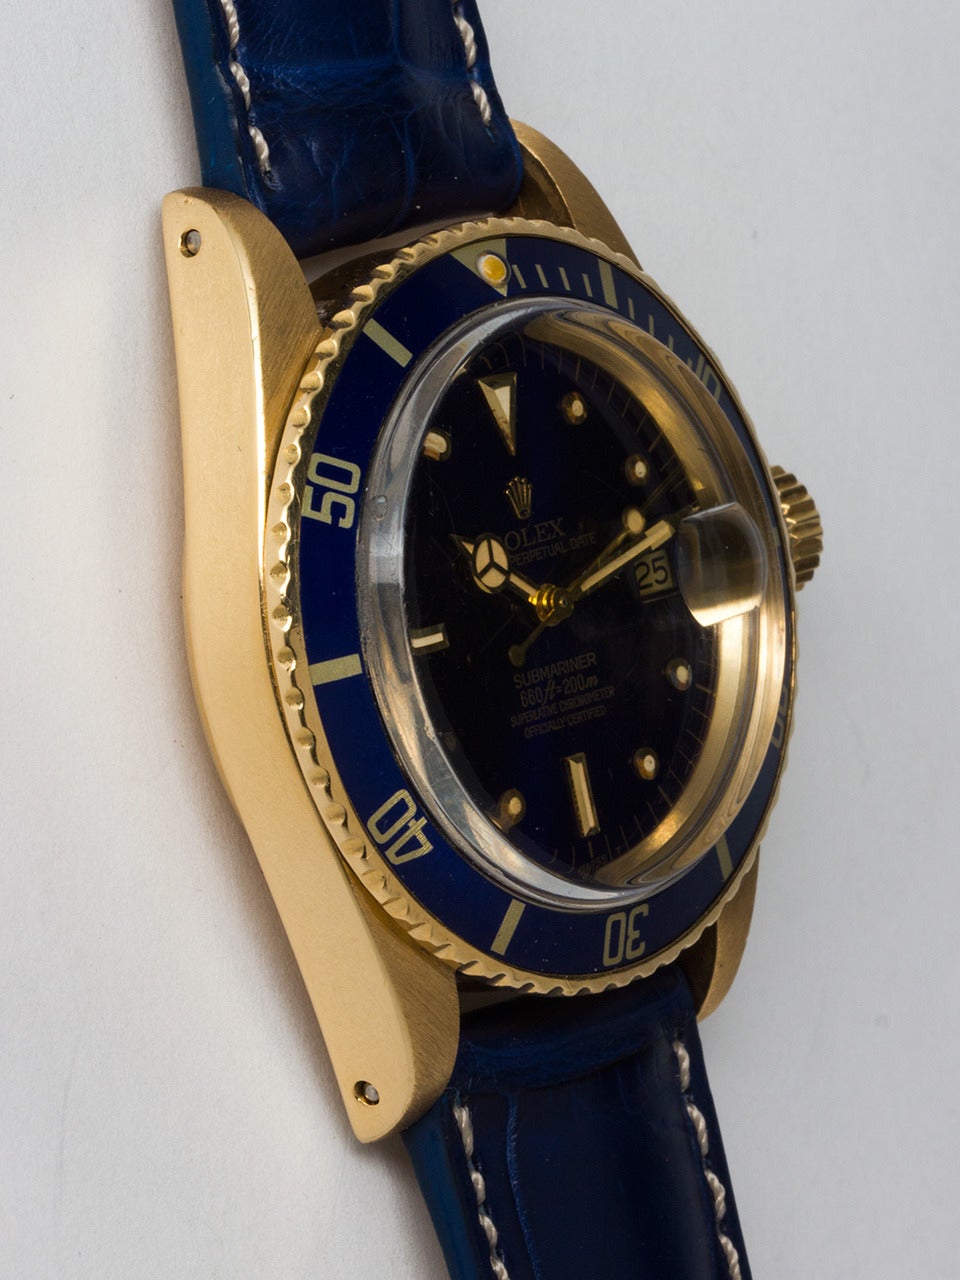 Rolex 18K Yellow Gold Submariner Wristwatch, ref 1680 serial number 5.8 million circa 1978. 40mm diameter case with bi-directional elapsed time bezel with original blue insert with antique color pearl and acrylic crystal. Great condition original